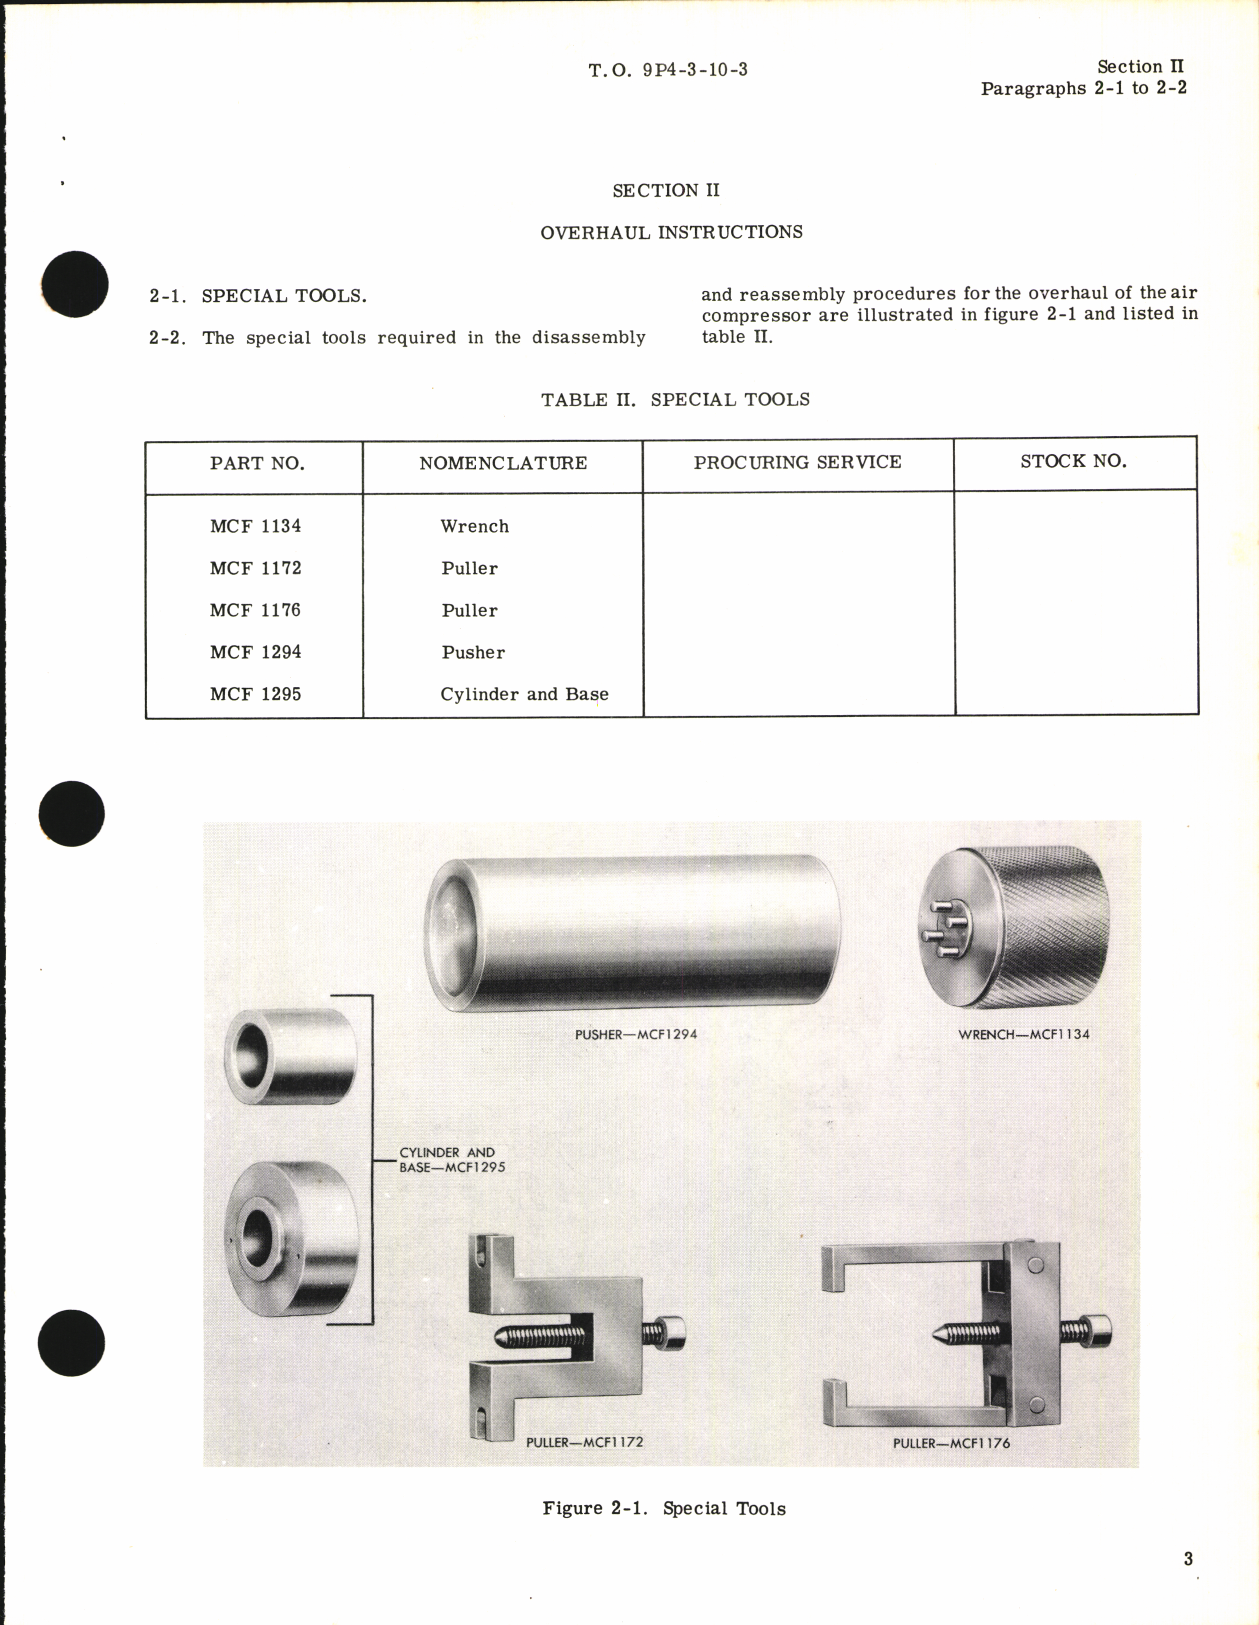 Sample page 5 from AirCorps Library document: Handbook of Overhaul Instructions for Air Compressors MC2003 Series